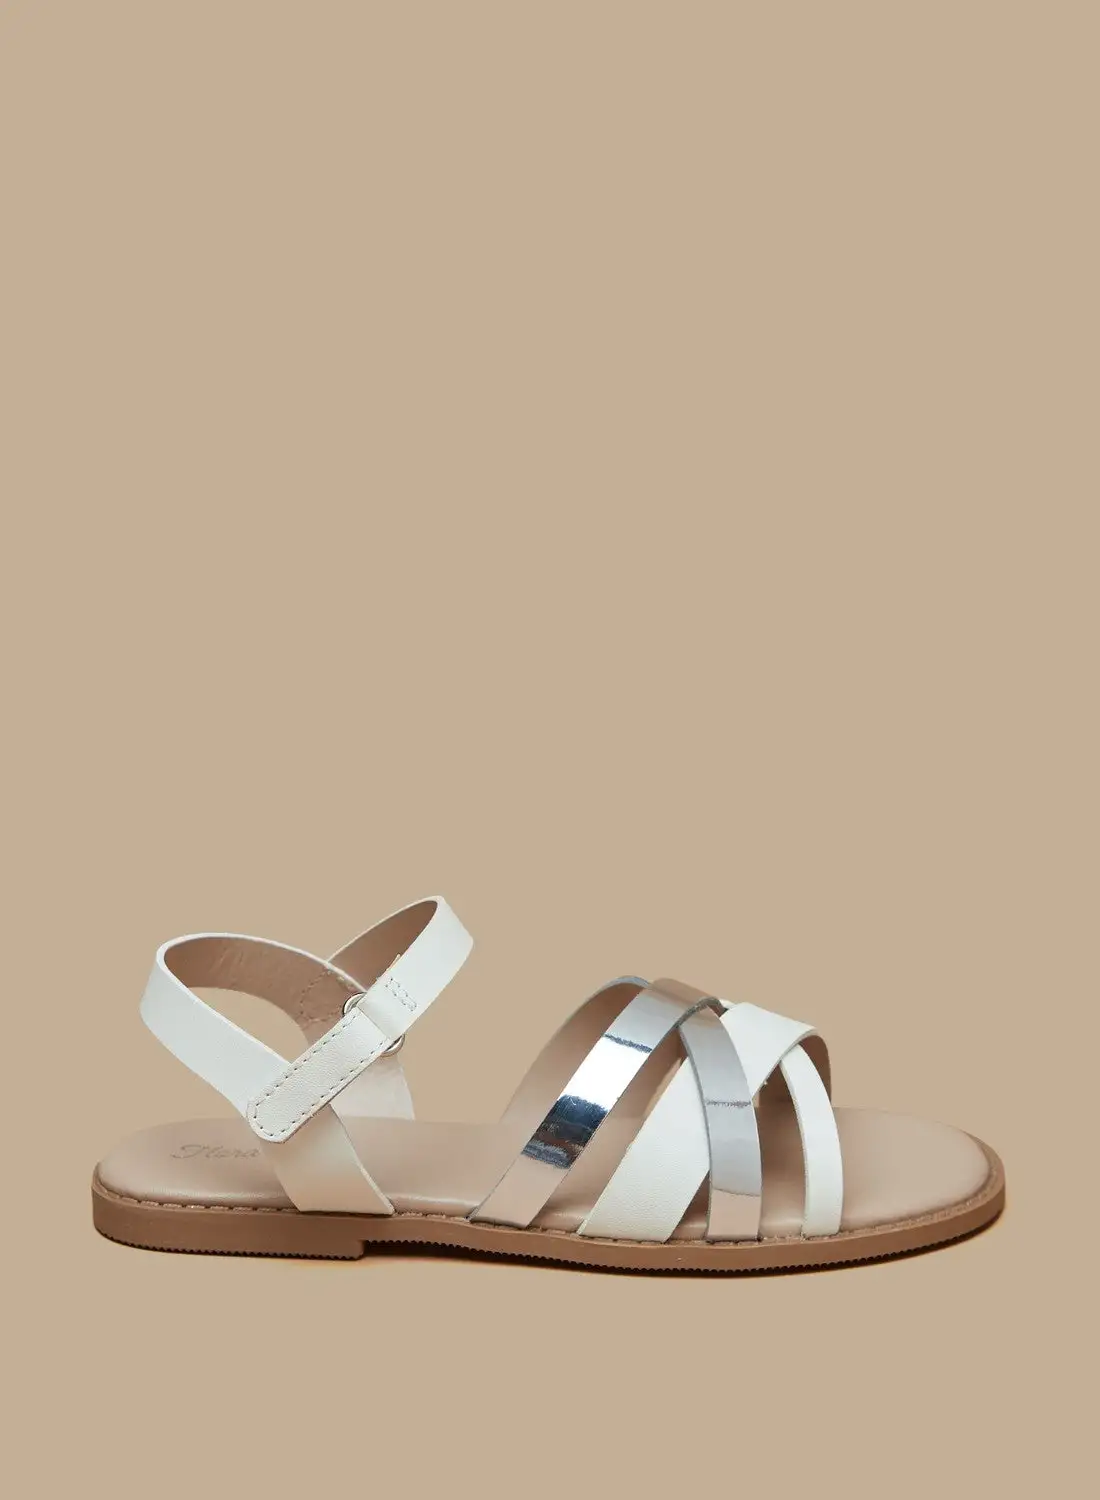 Flora Bella By Shoexpress Girls Textured Cross Strap Slip On Sandals with Hook and Loop Closure